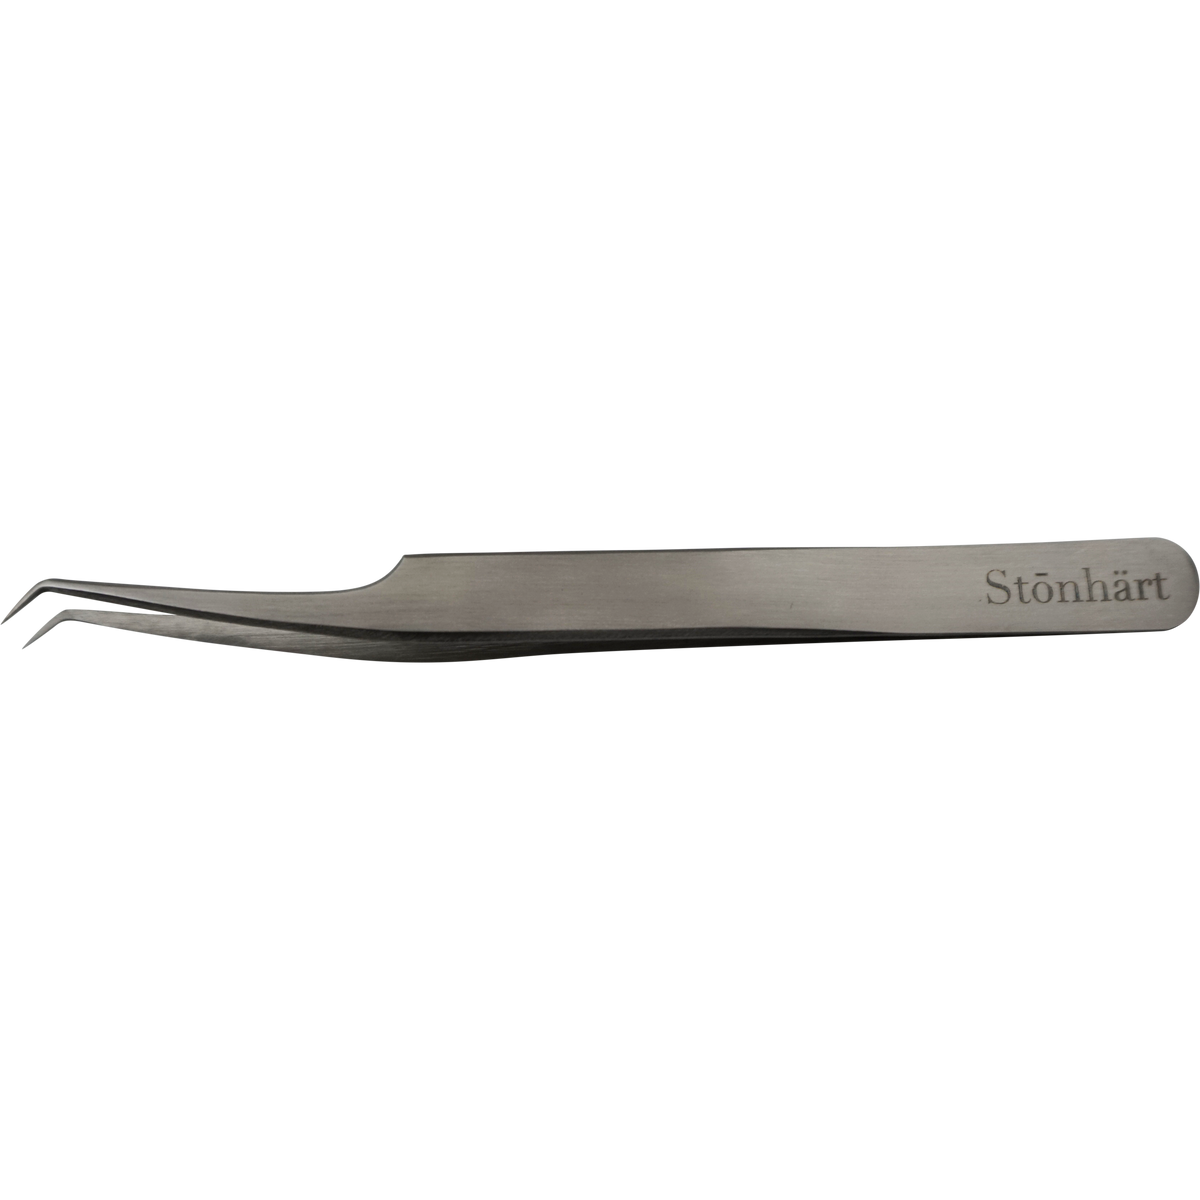 angled eyelash extension tweezers that are easy to grip and comfortable for lash artists